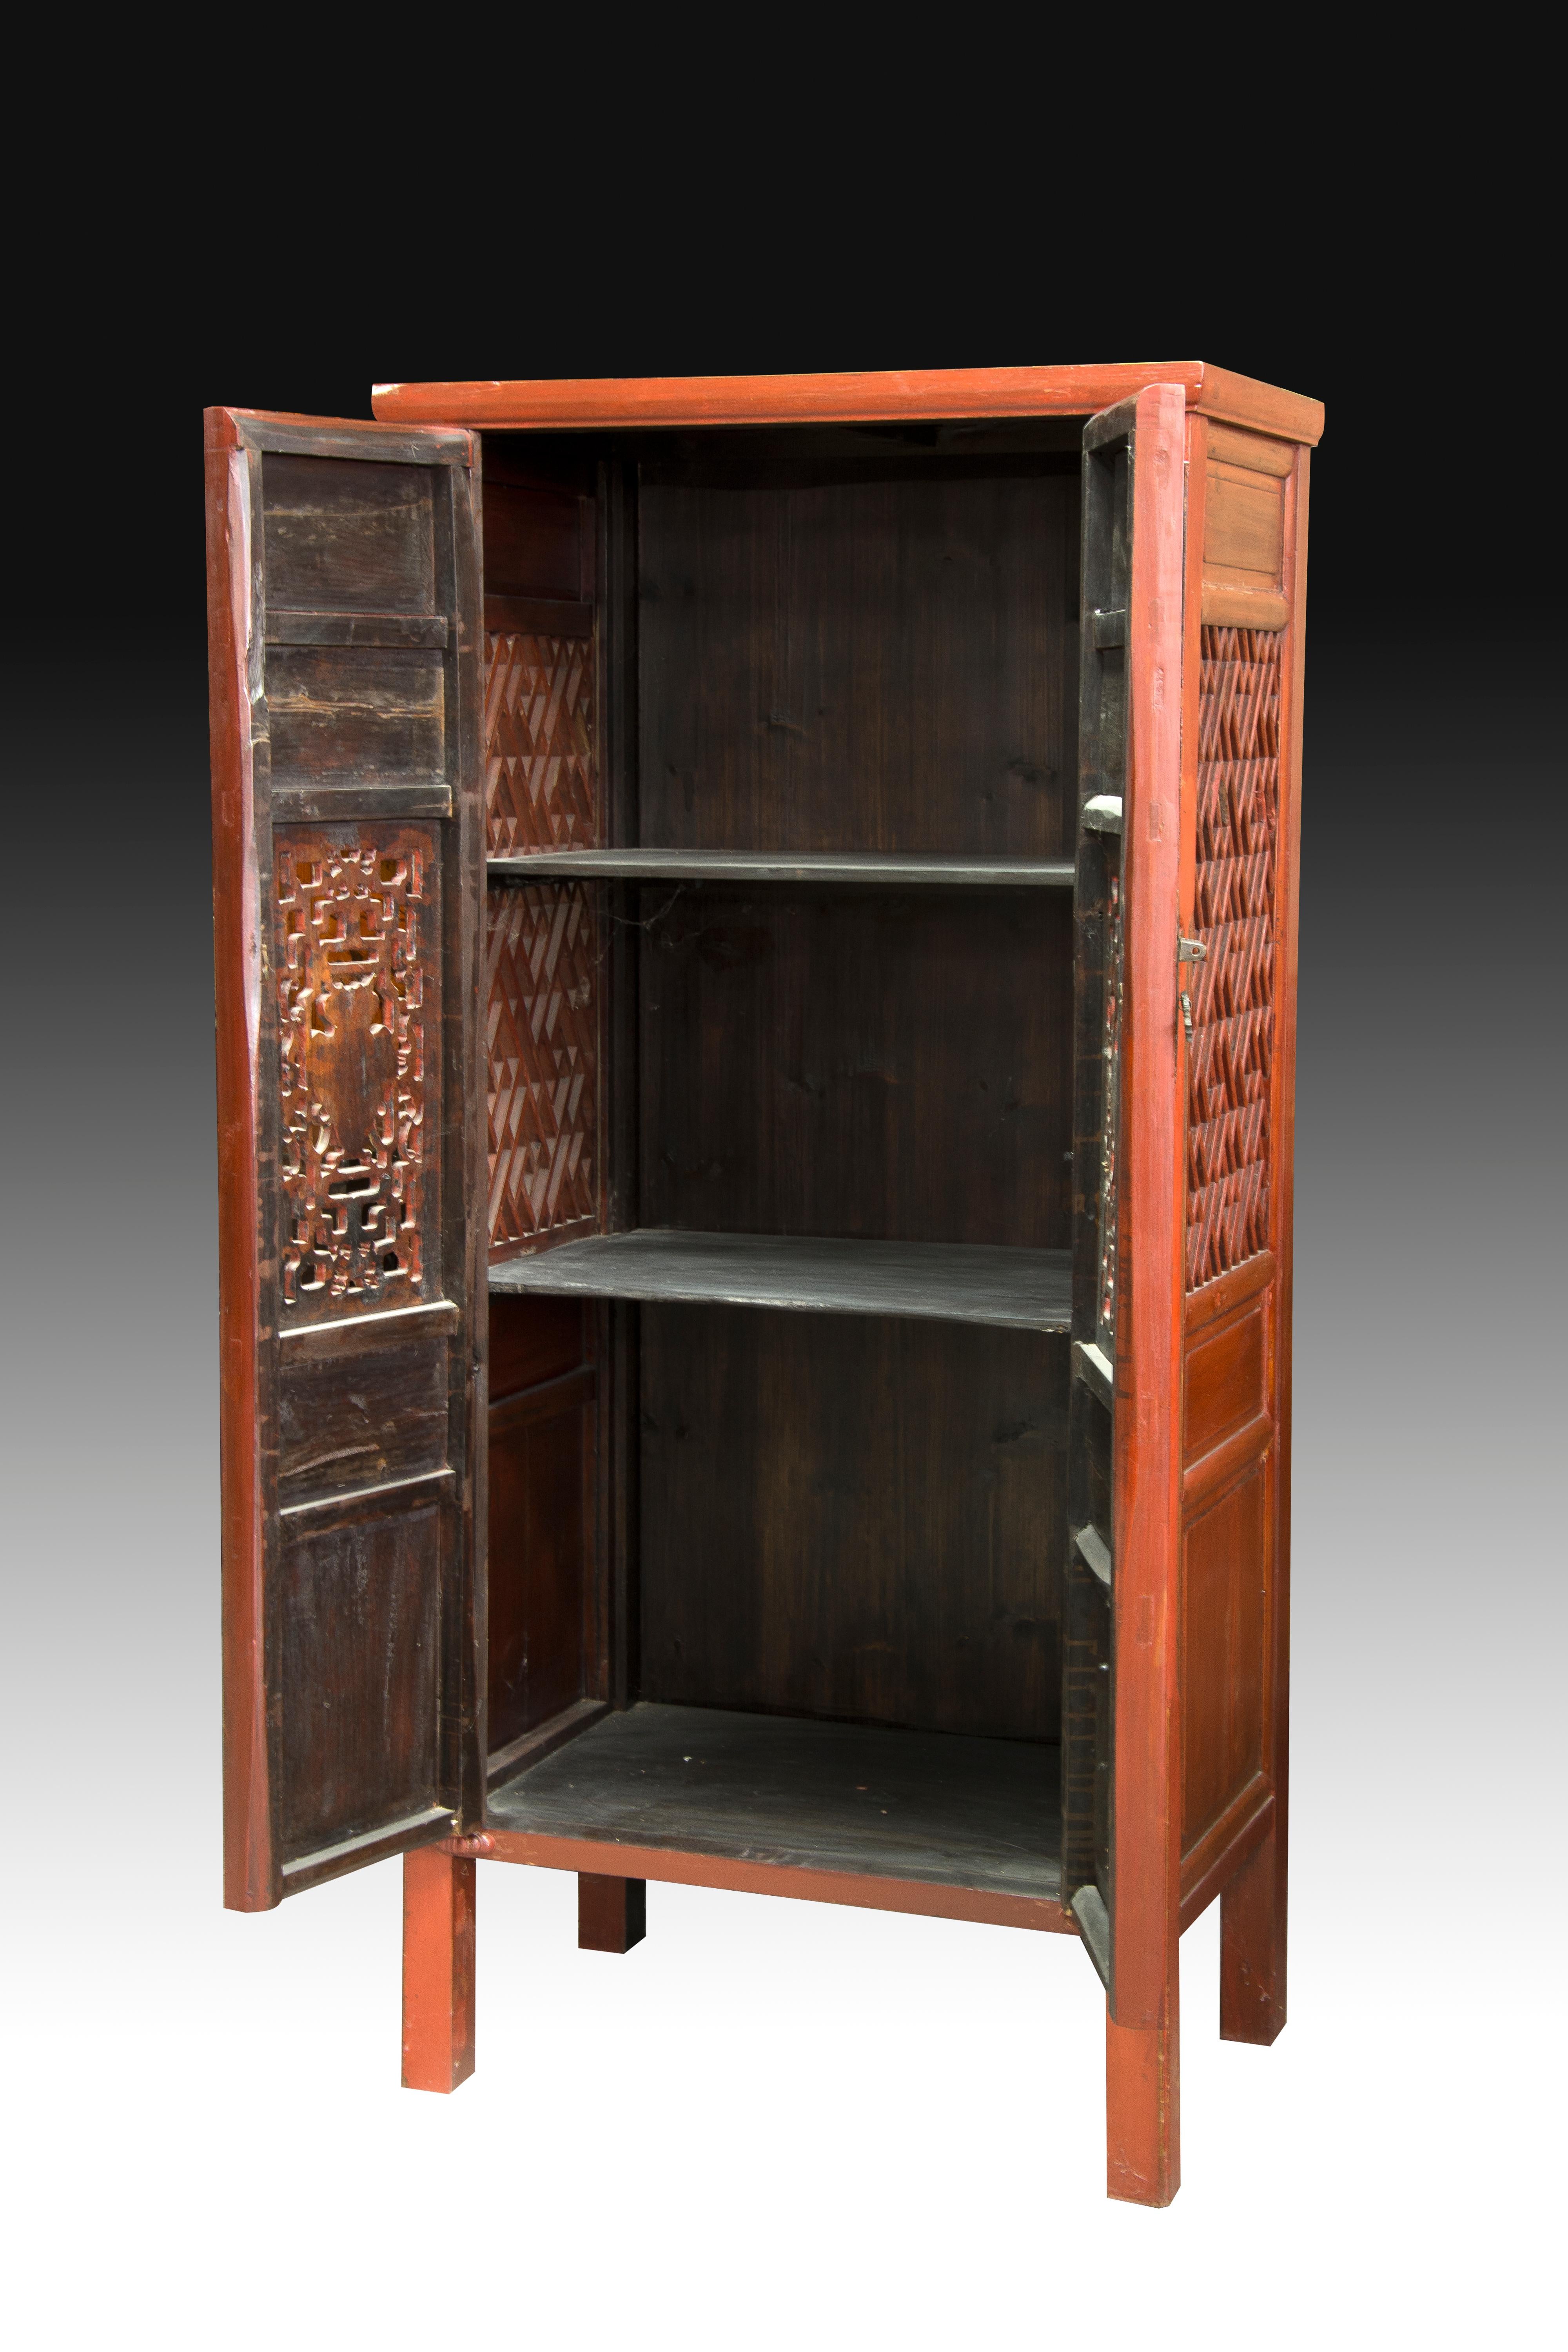 Tall carved wooden wardrobe decorated on the sides with simple geometric shapes enhancing a geometric fretwork composition and, on the front, with various rectangular spaces with scenes, geometric elements set around figurative scenes and floral